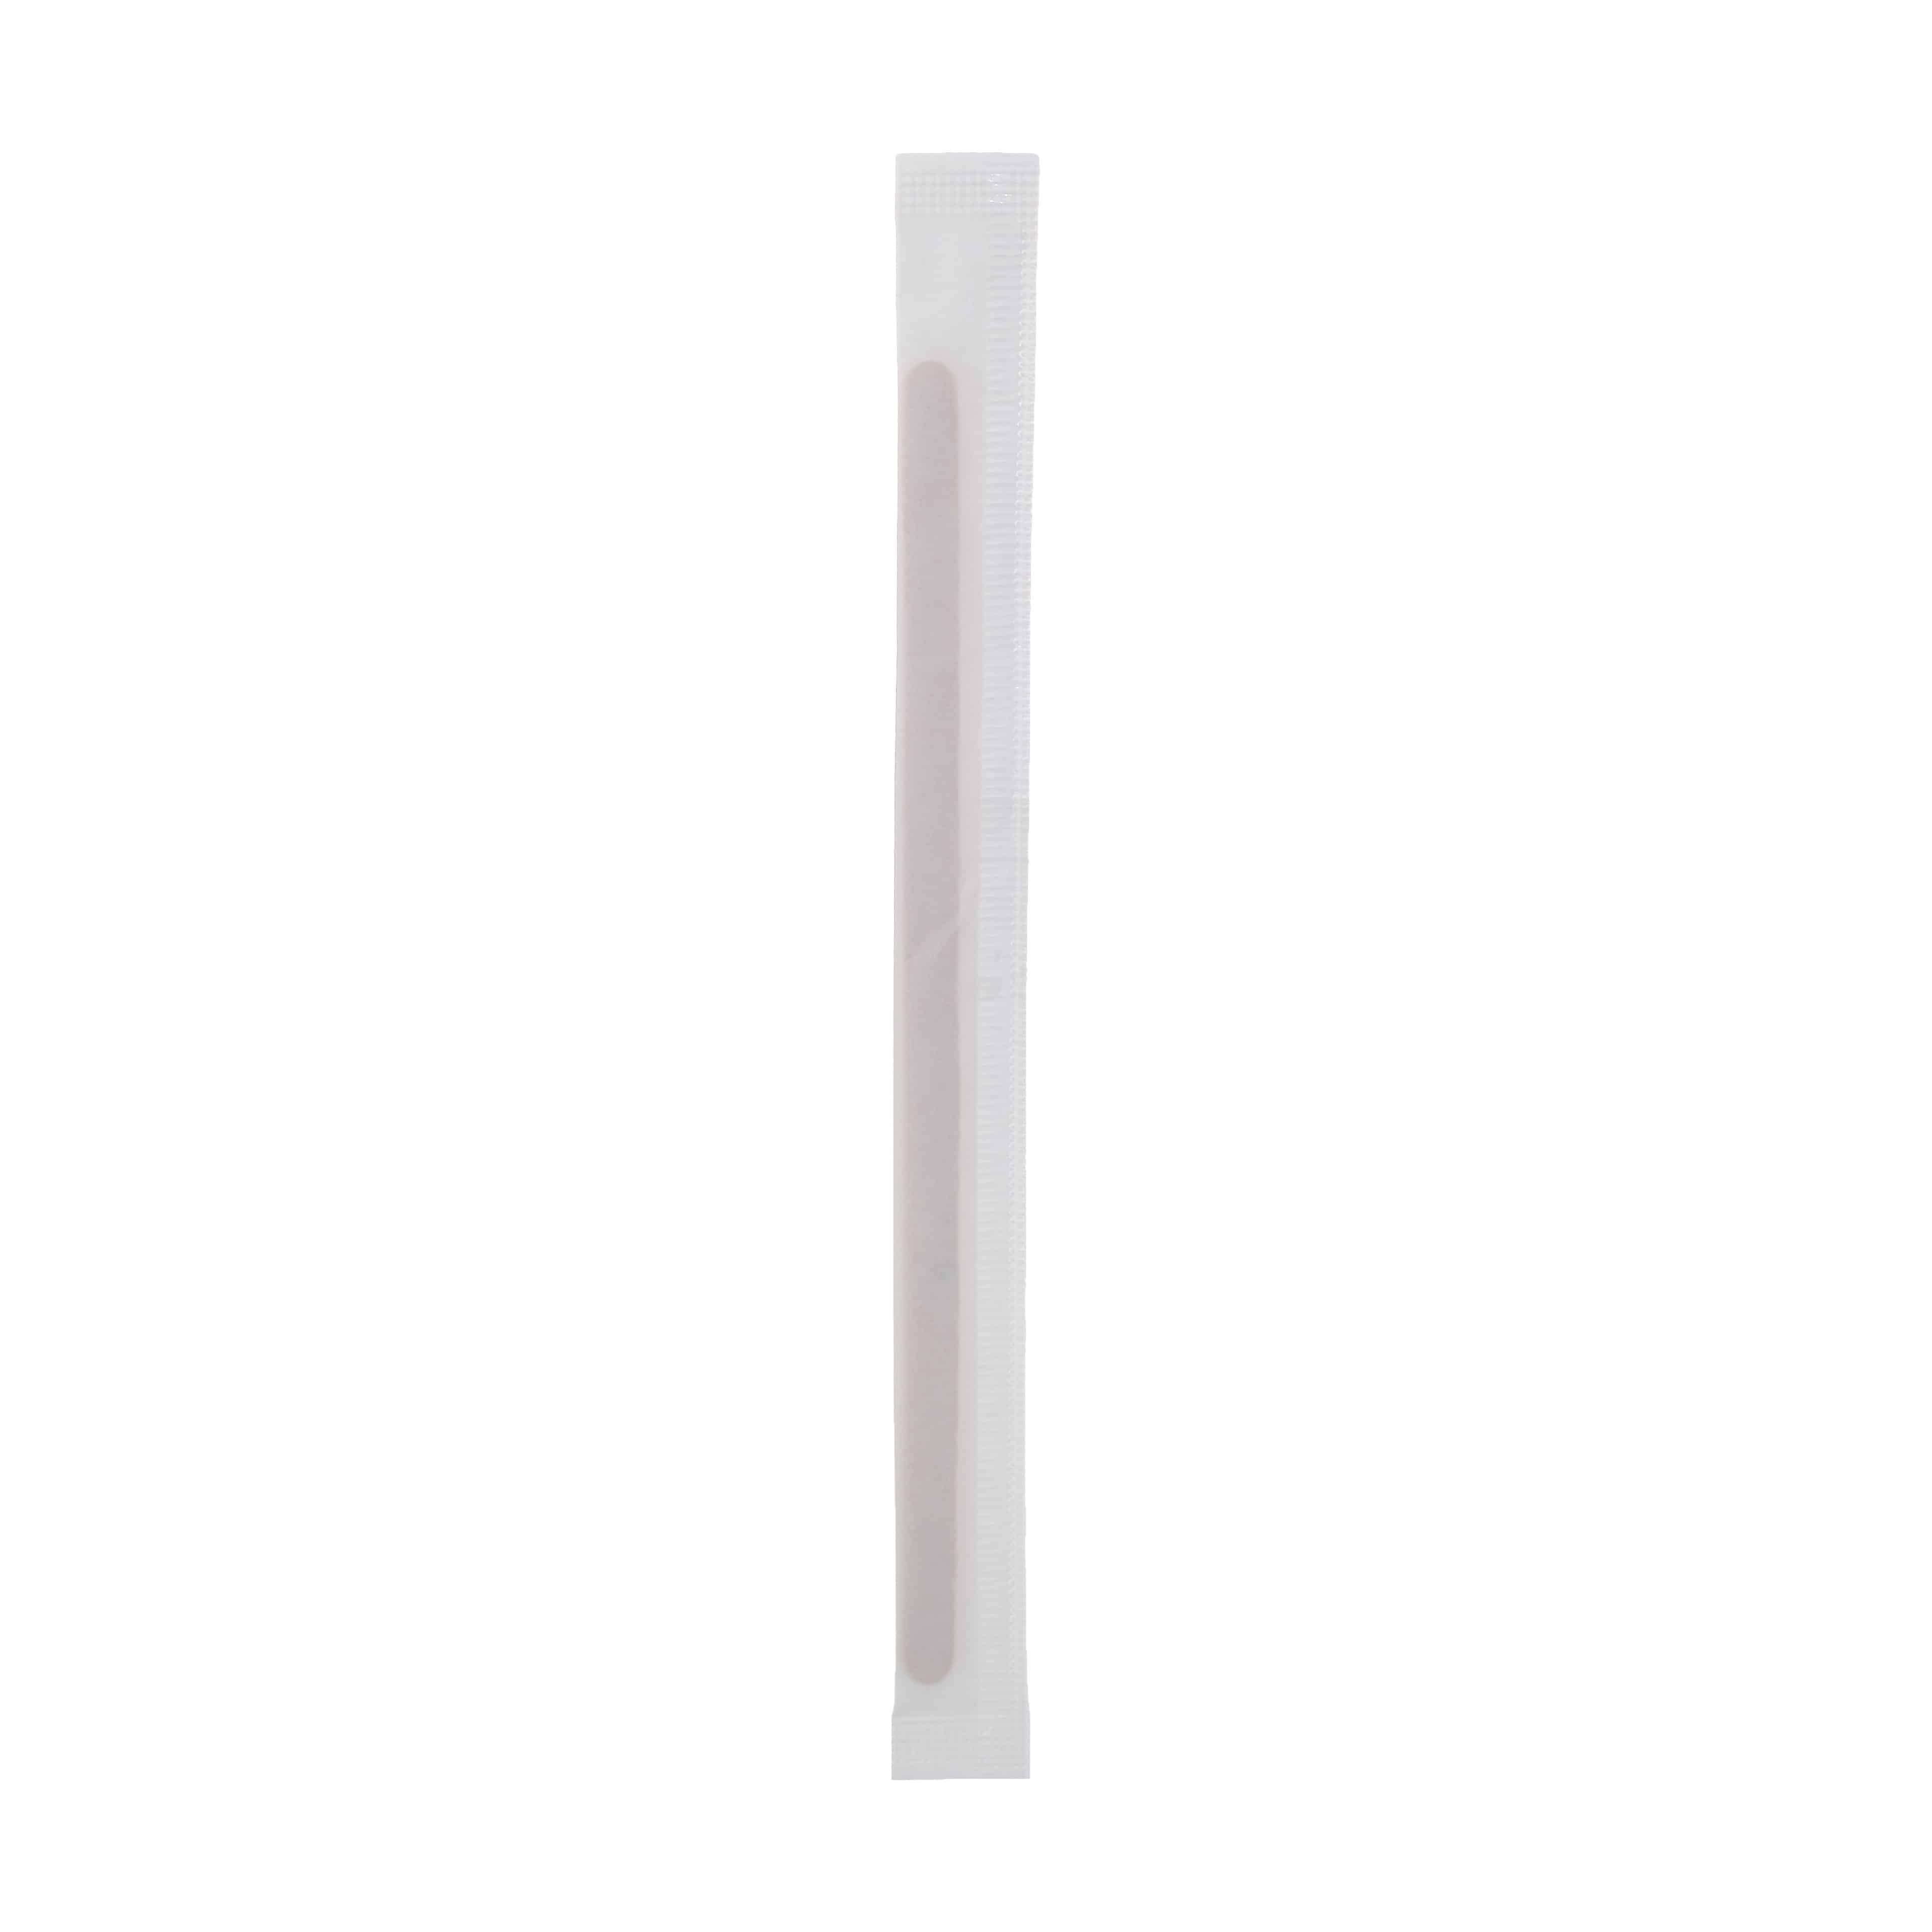 Disposable Individually Wrapped Wooden Coffee Stirrer